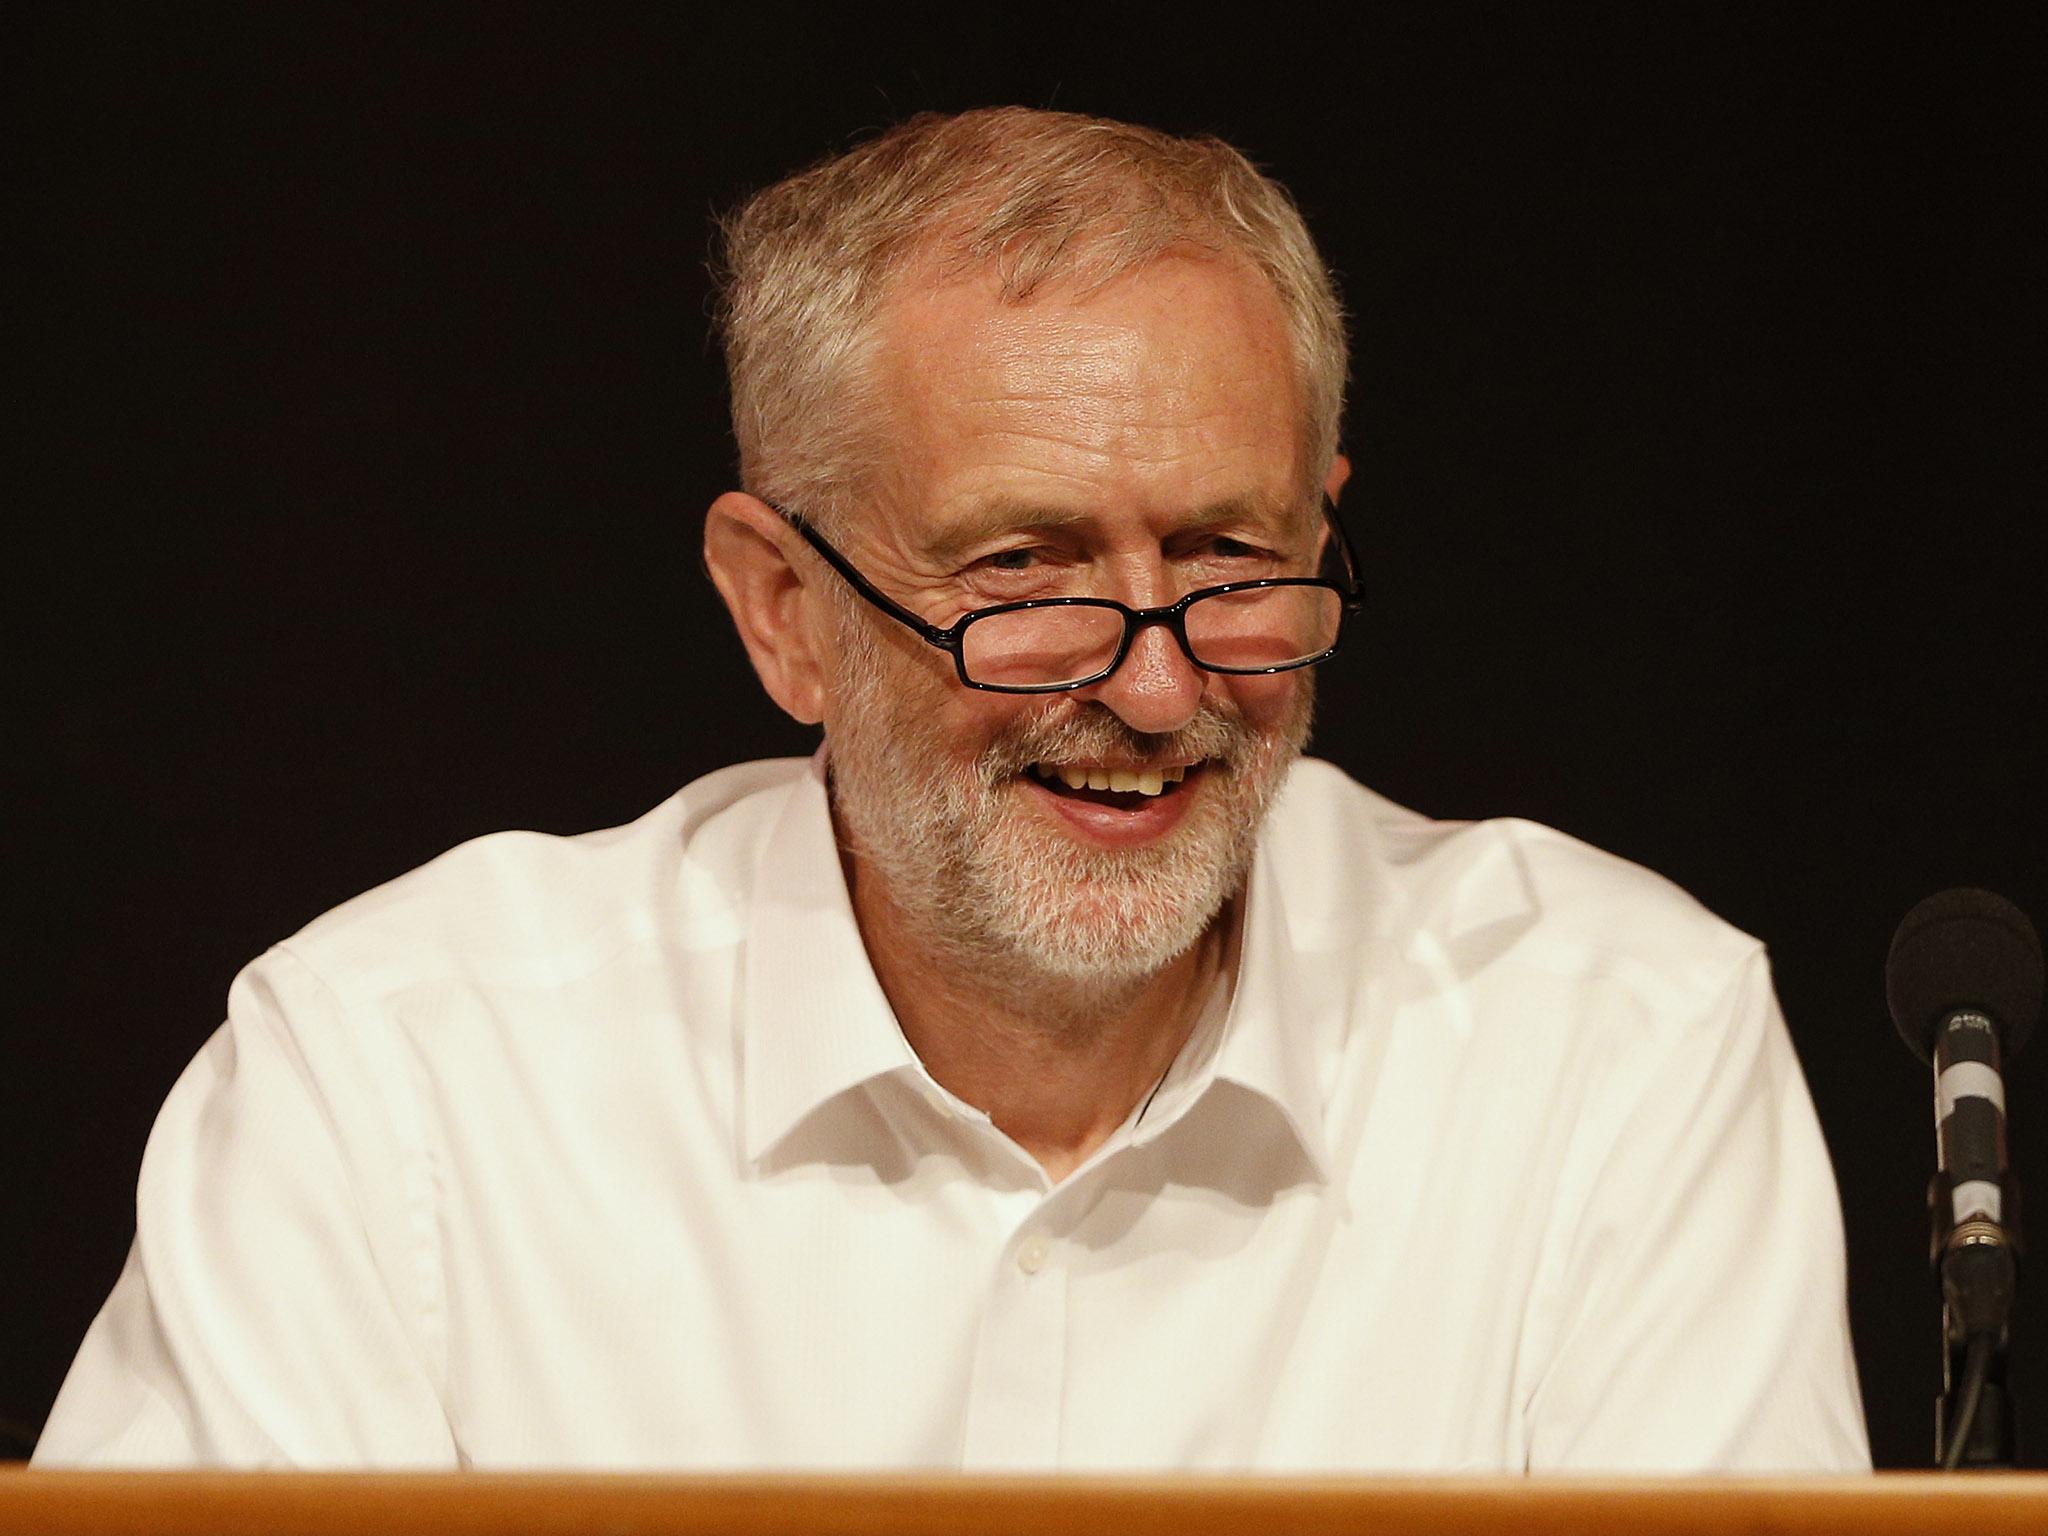 Like Jeremy Corbyn, I can’t bring myself to send my child to private school